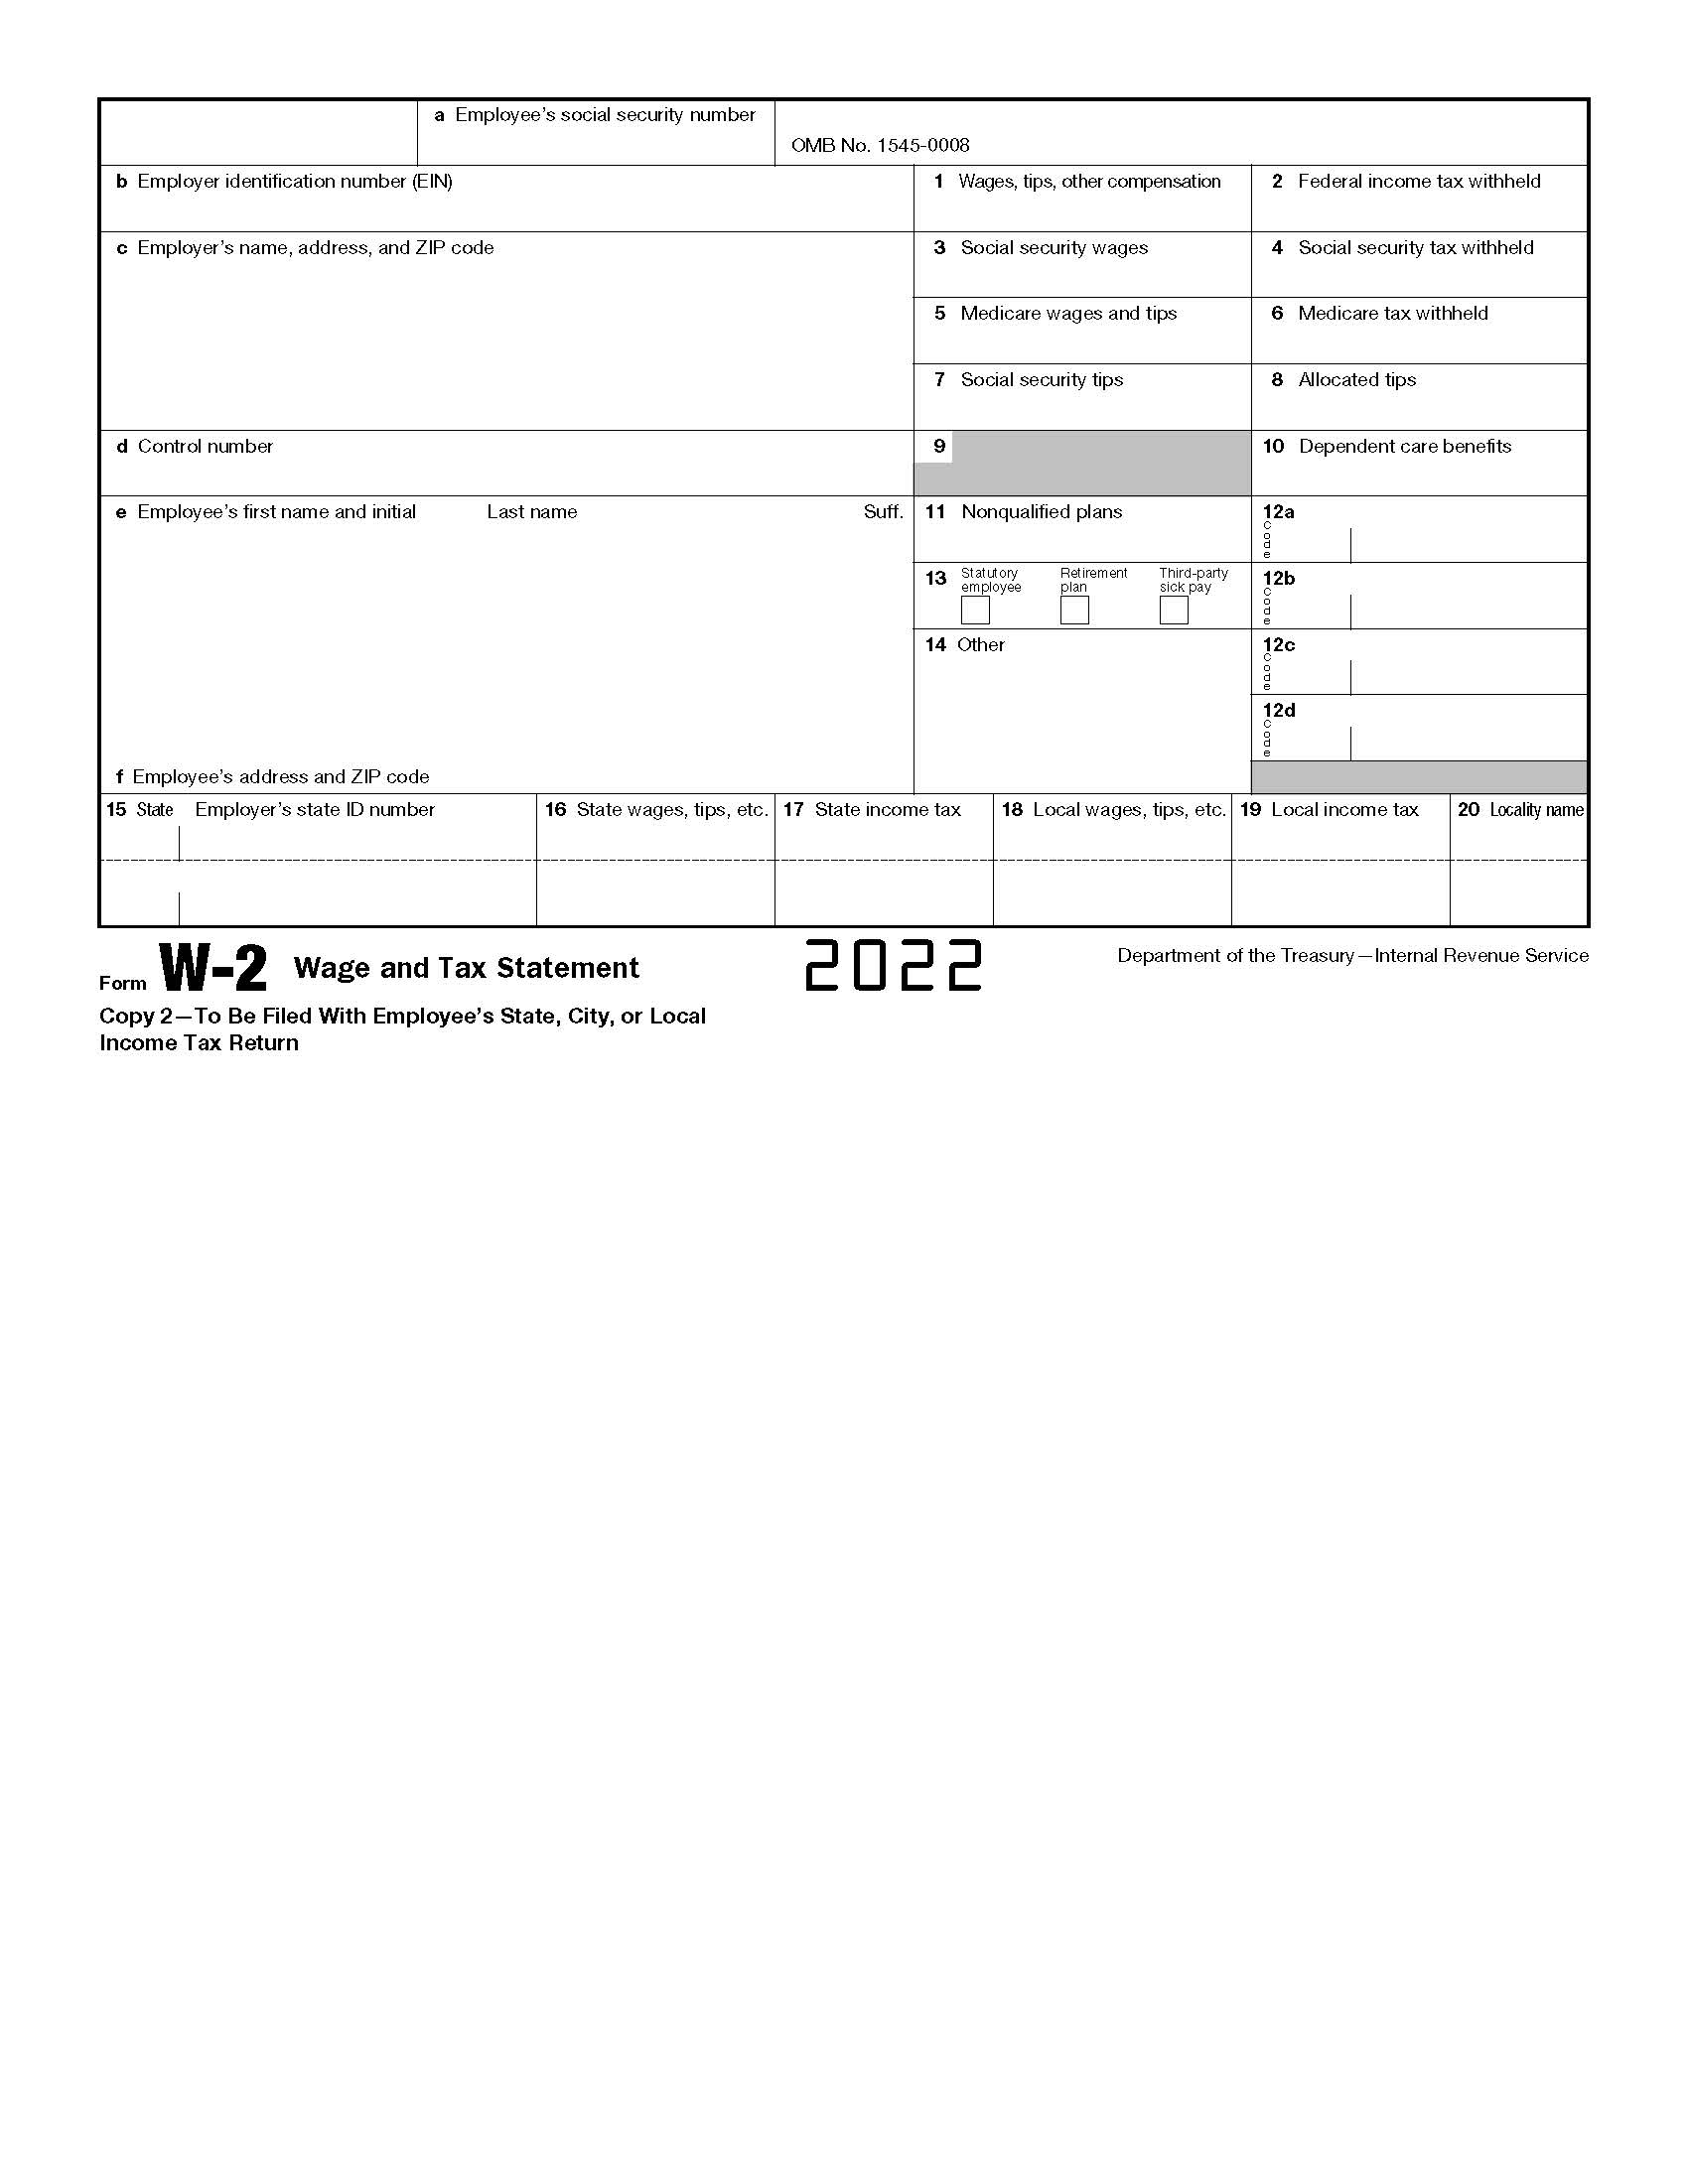 W-2 Form 2022 - A Complete Guide to Wage and Tax Statements_Page_08